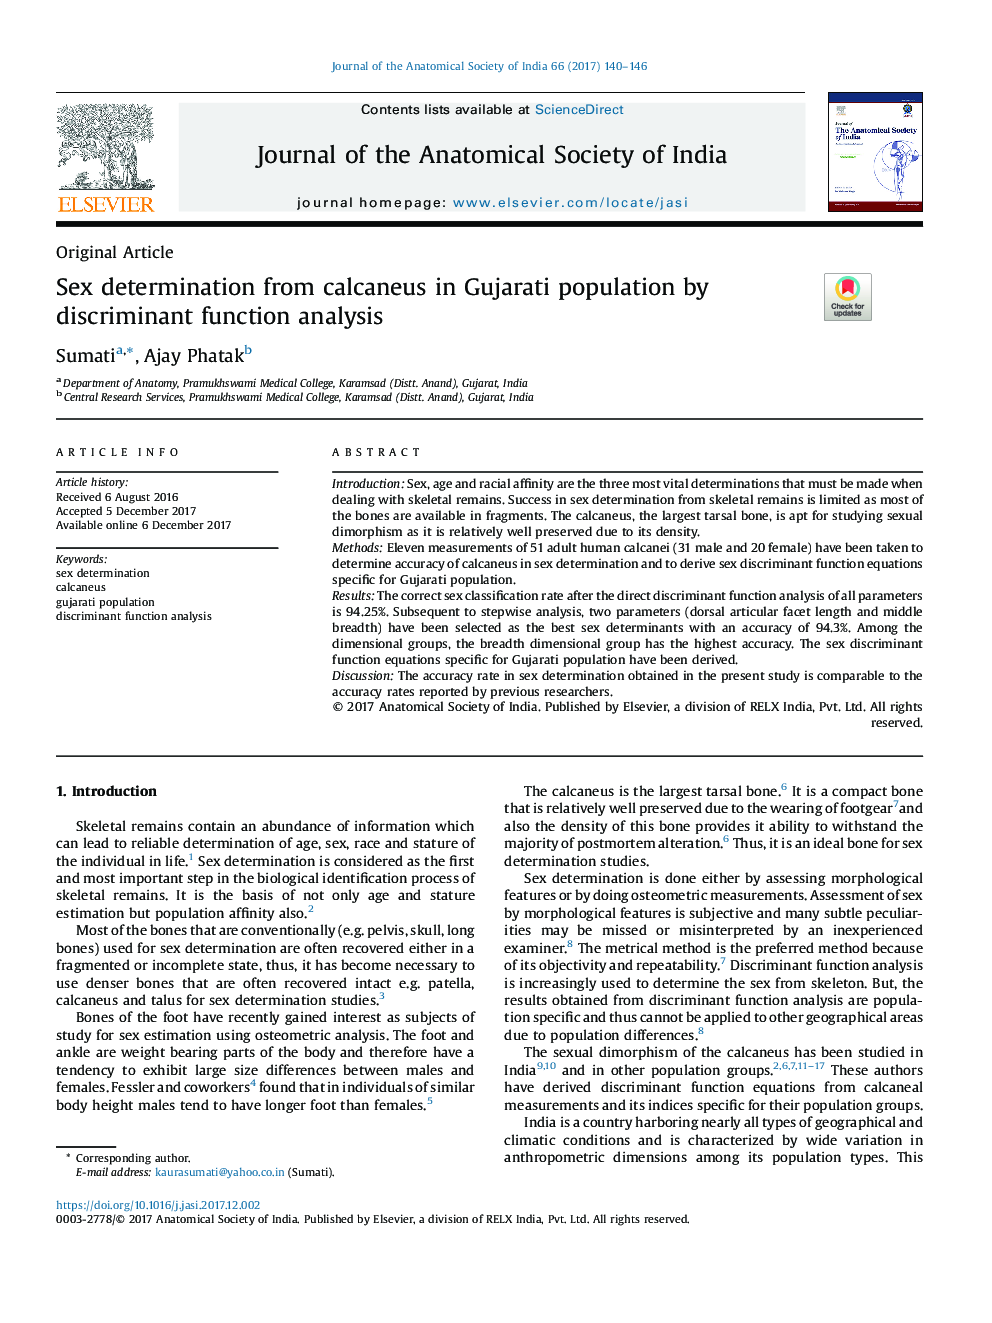 Sex determination from calcaneus in Gujarati population by discriminant function analysis